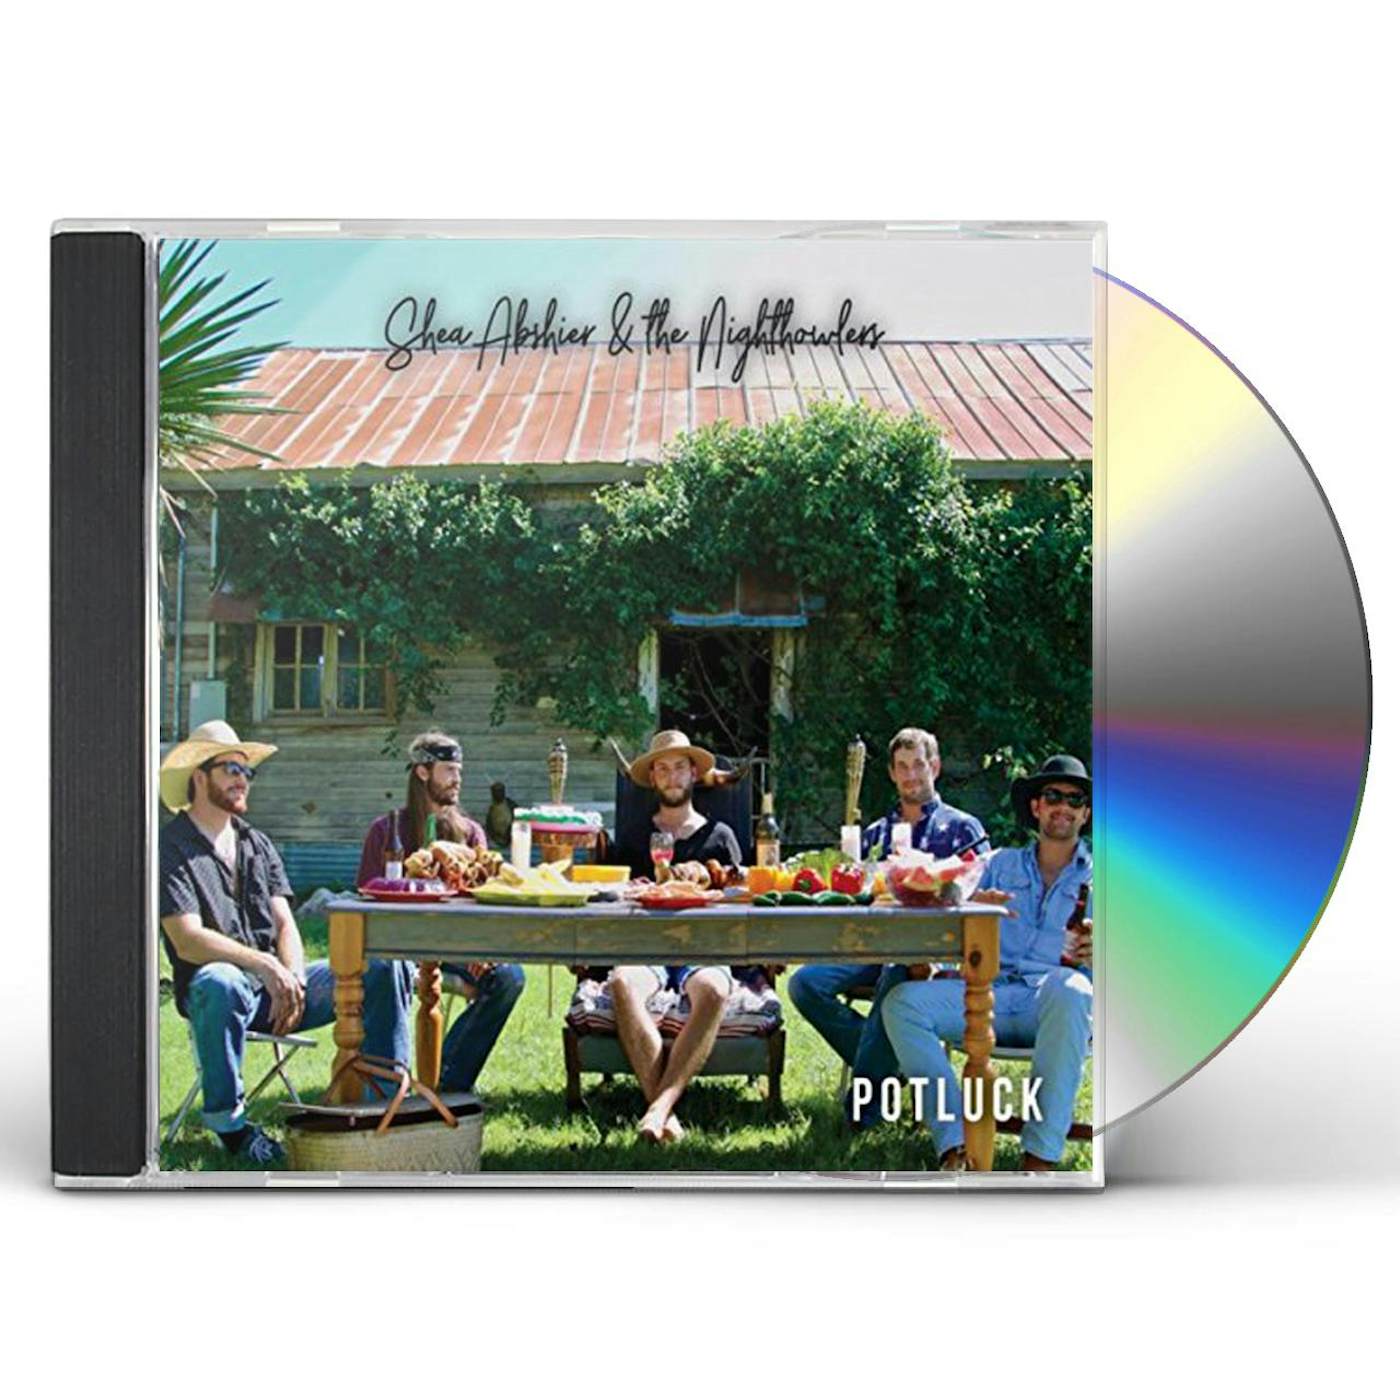 Shea Abshier & the Nighthowlers POTLUCK CD